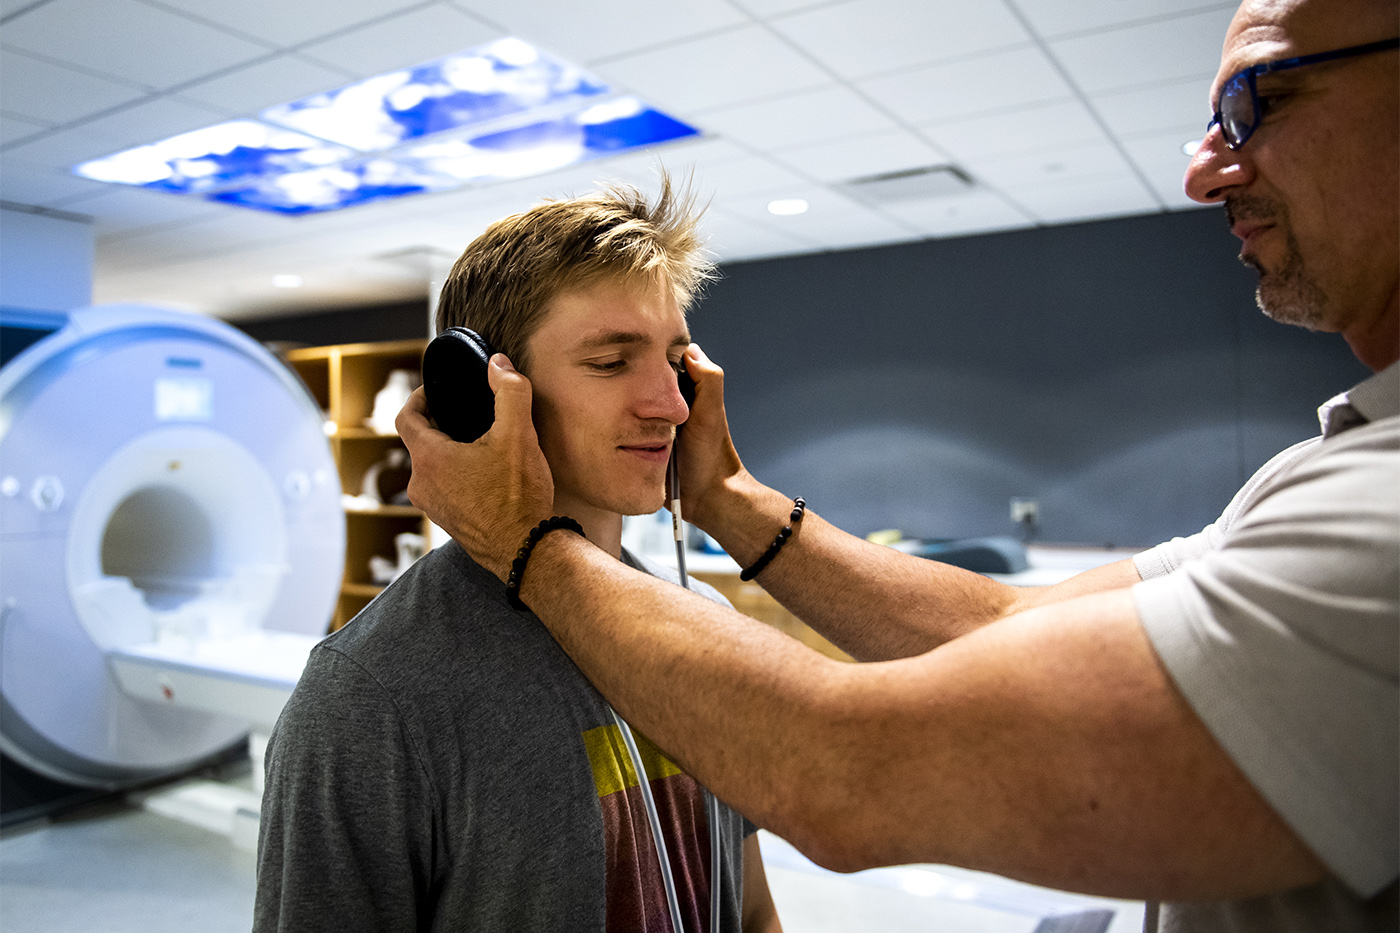 08/06/19 - BOSTON, MA. - Student Kieran McVeigh demonstrates how headphones are used for Psyche Loui and Ajay Satpute’s research on the relationship between musical anhedonia and autism spectrum disorders in the Biomedical Imaging Center in the Interdisciplinary Science and Engineering Complex on August 06, 2019. Photo by Ruby Wallau/Northeastern University